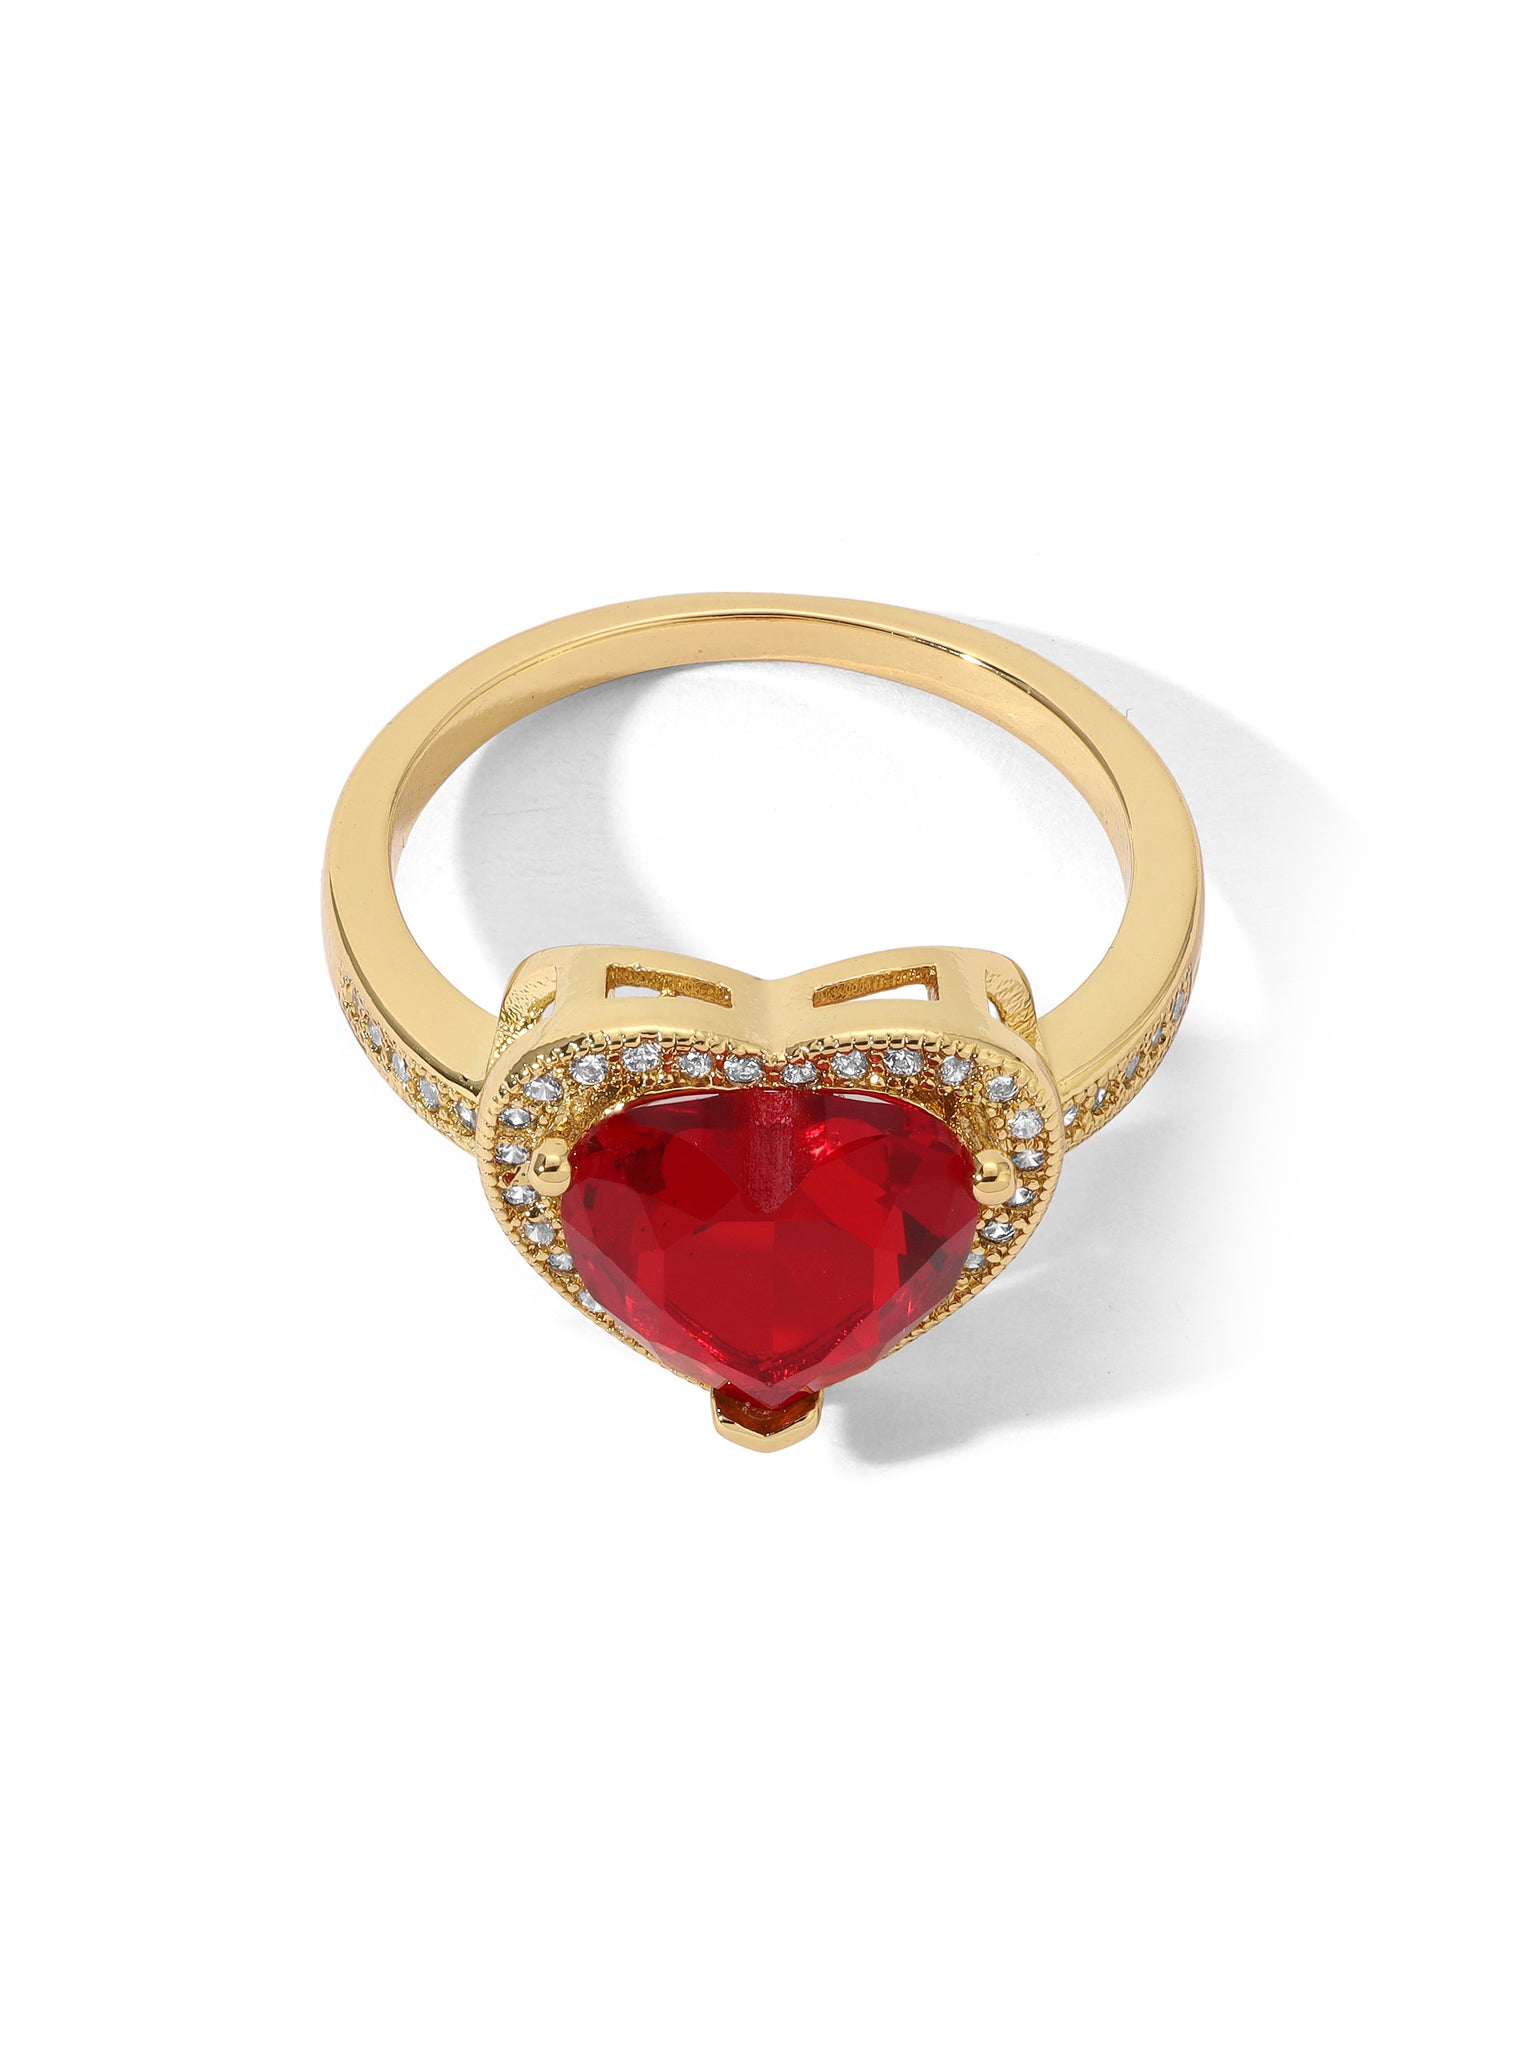 Red Crystal Heart Wide Band Ring in Gold | Jewellery | Lisa Angel